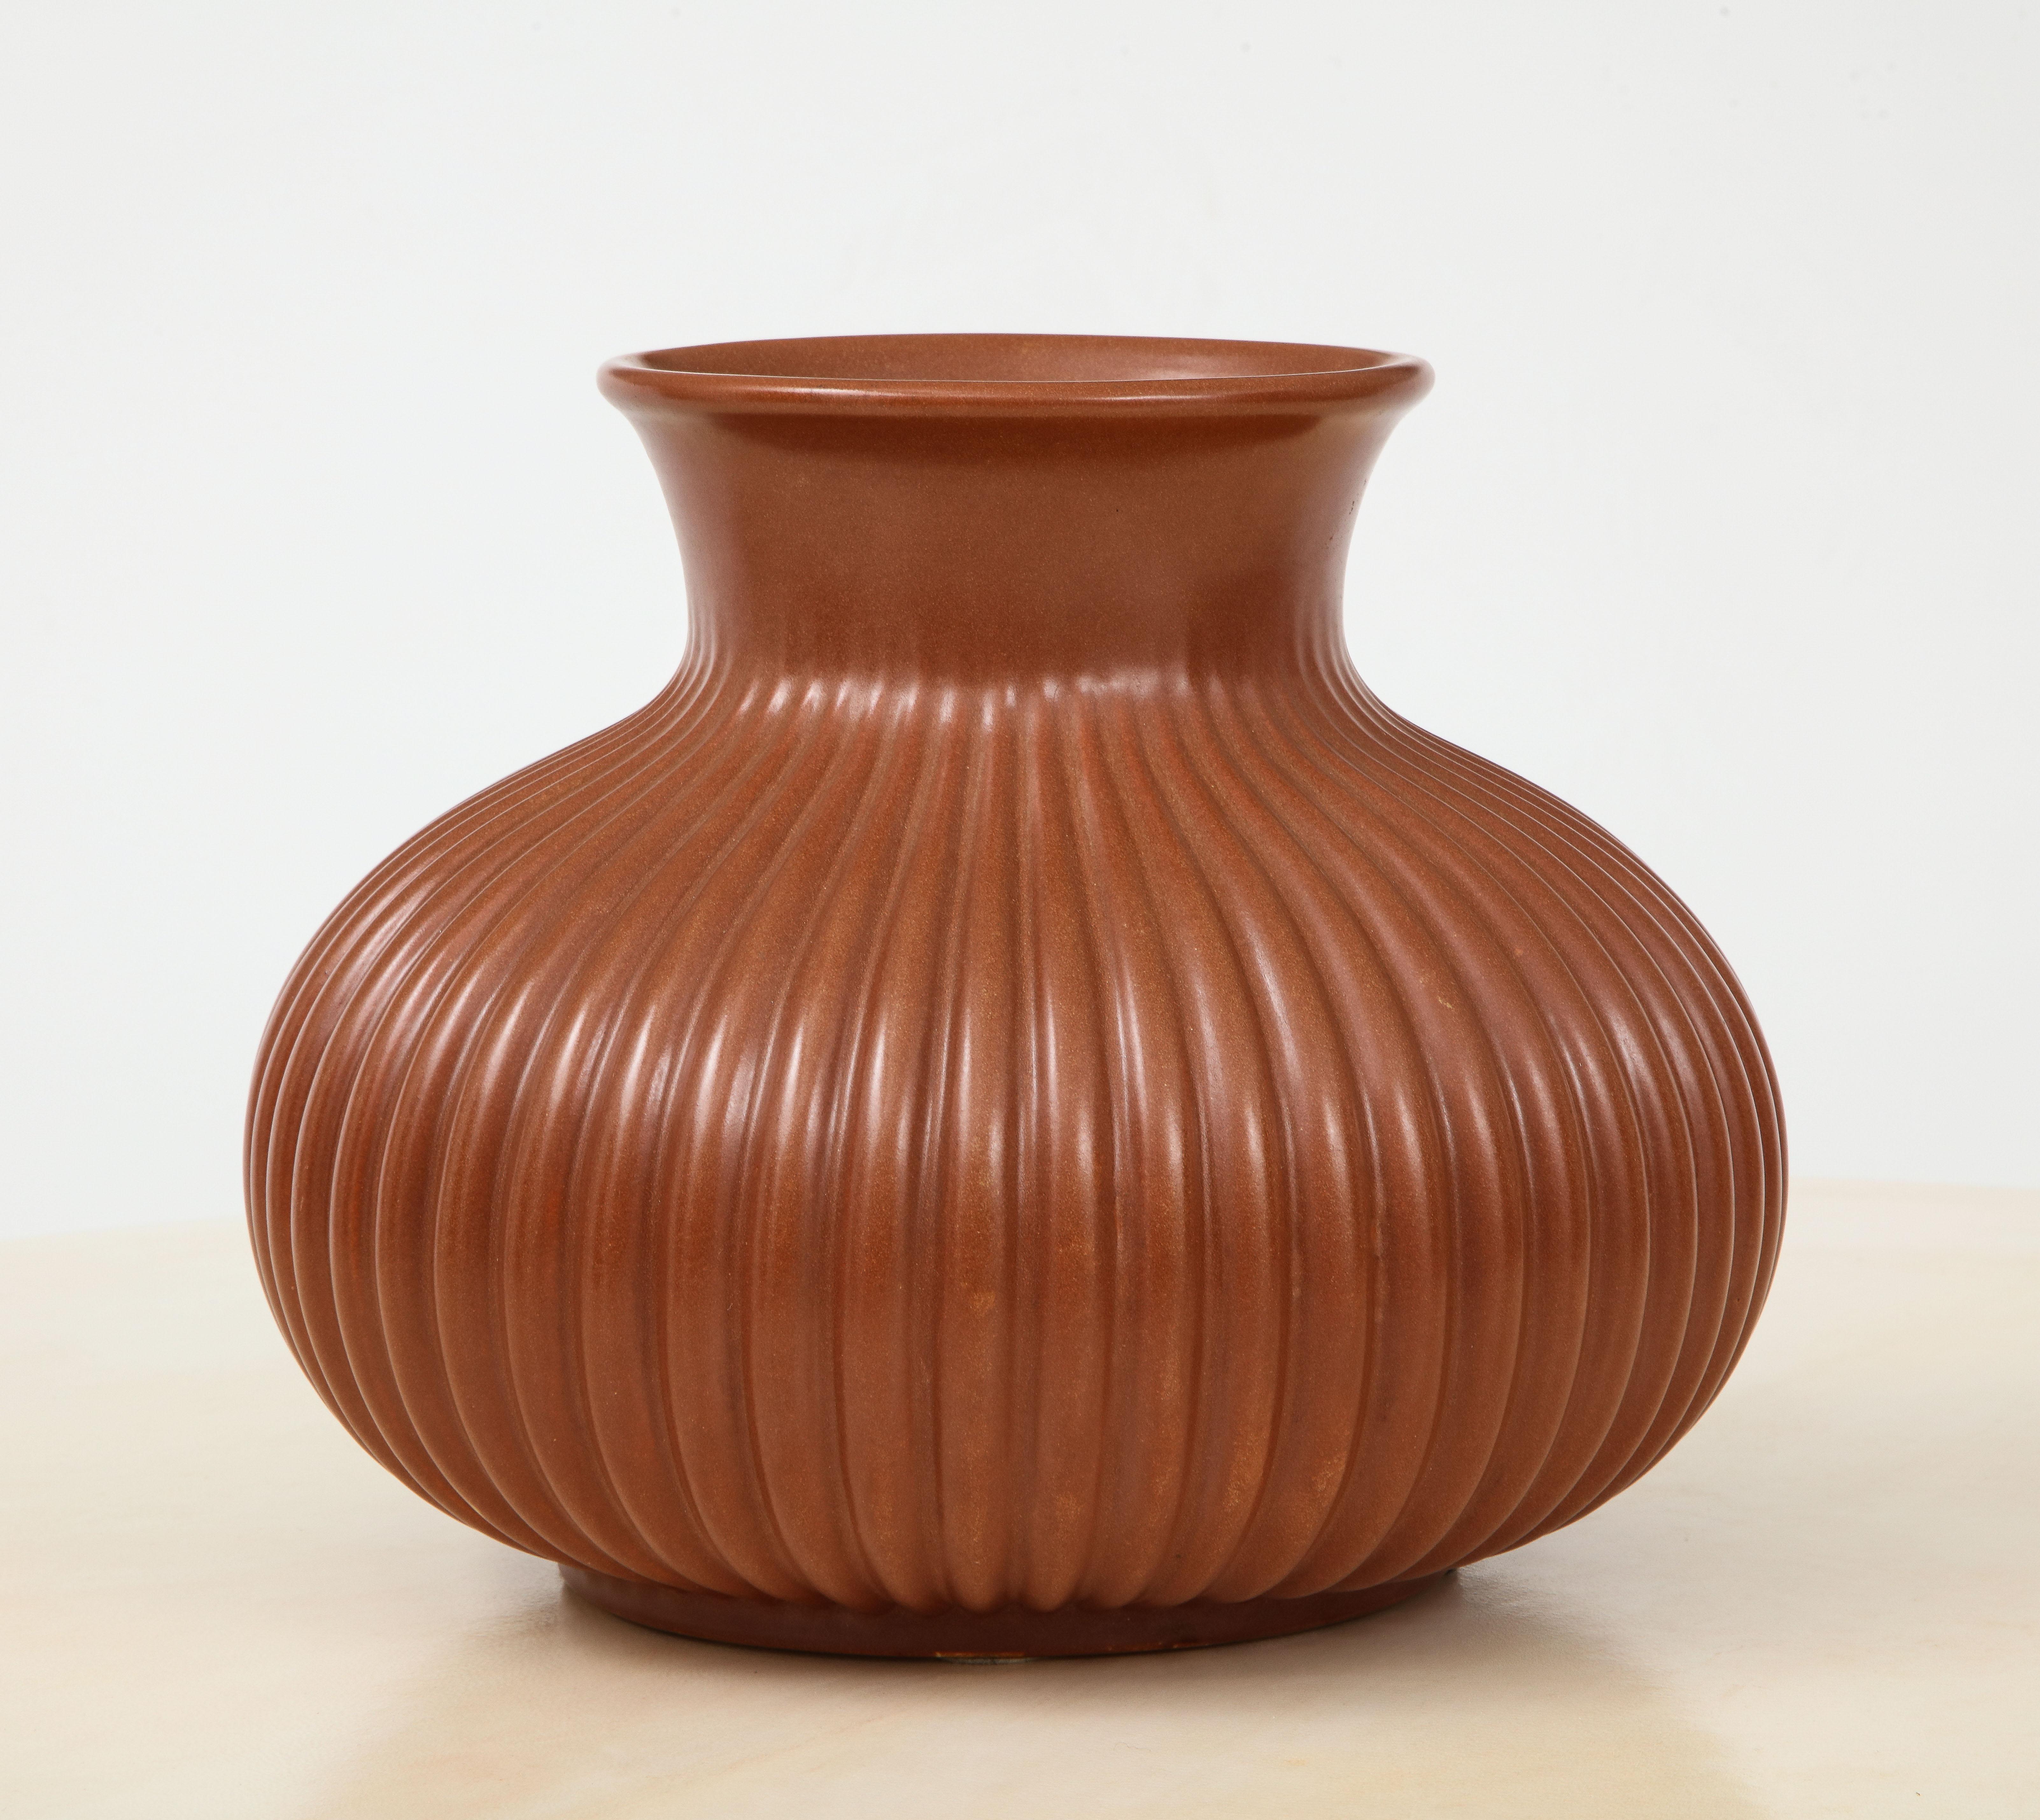 A 1930s Art Deco pottery vase designed by Giovanni Gariboldi for Richard Ginori. Beautifully ribbed carving and wonderful proportions,
Italy, circa 1930
Size: 9 3/4